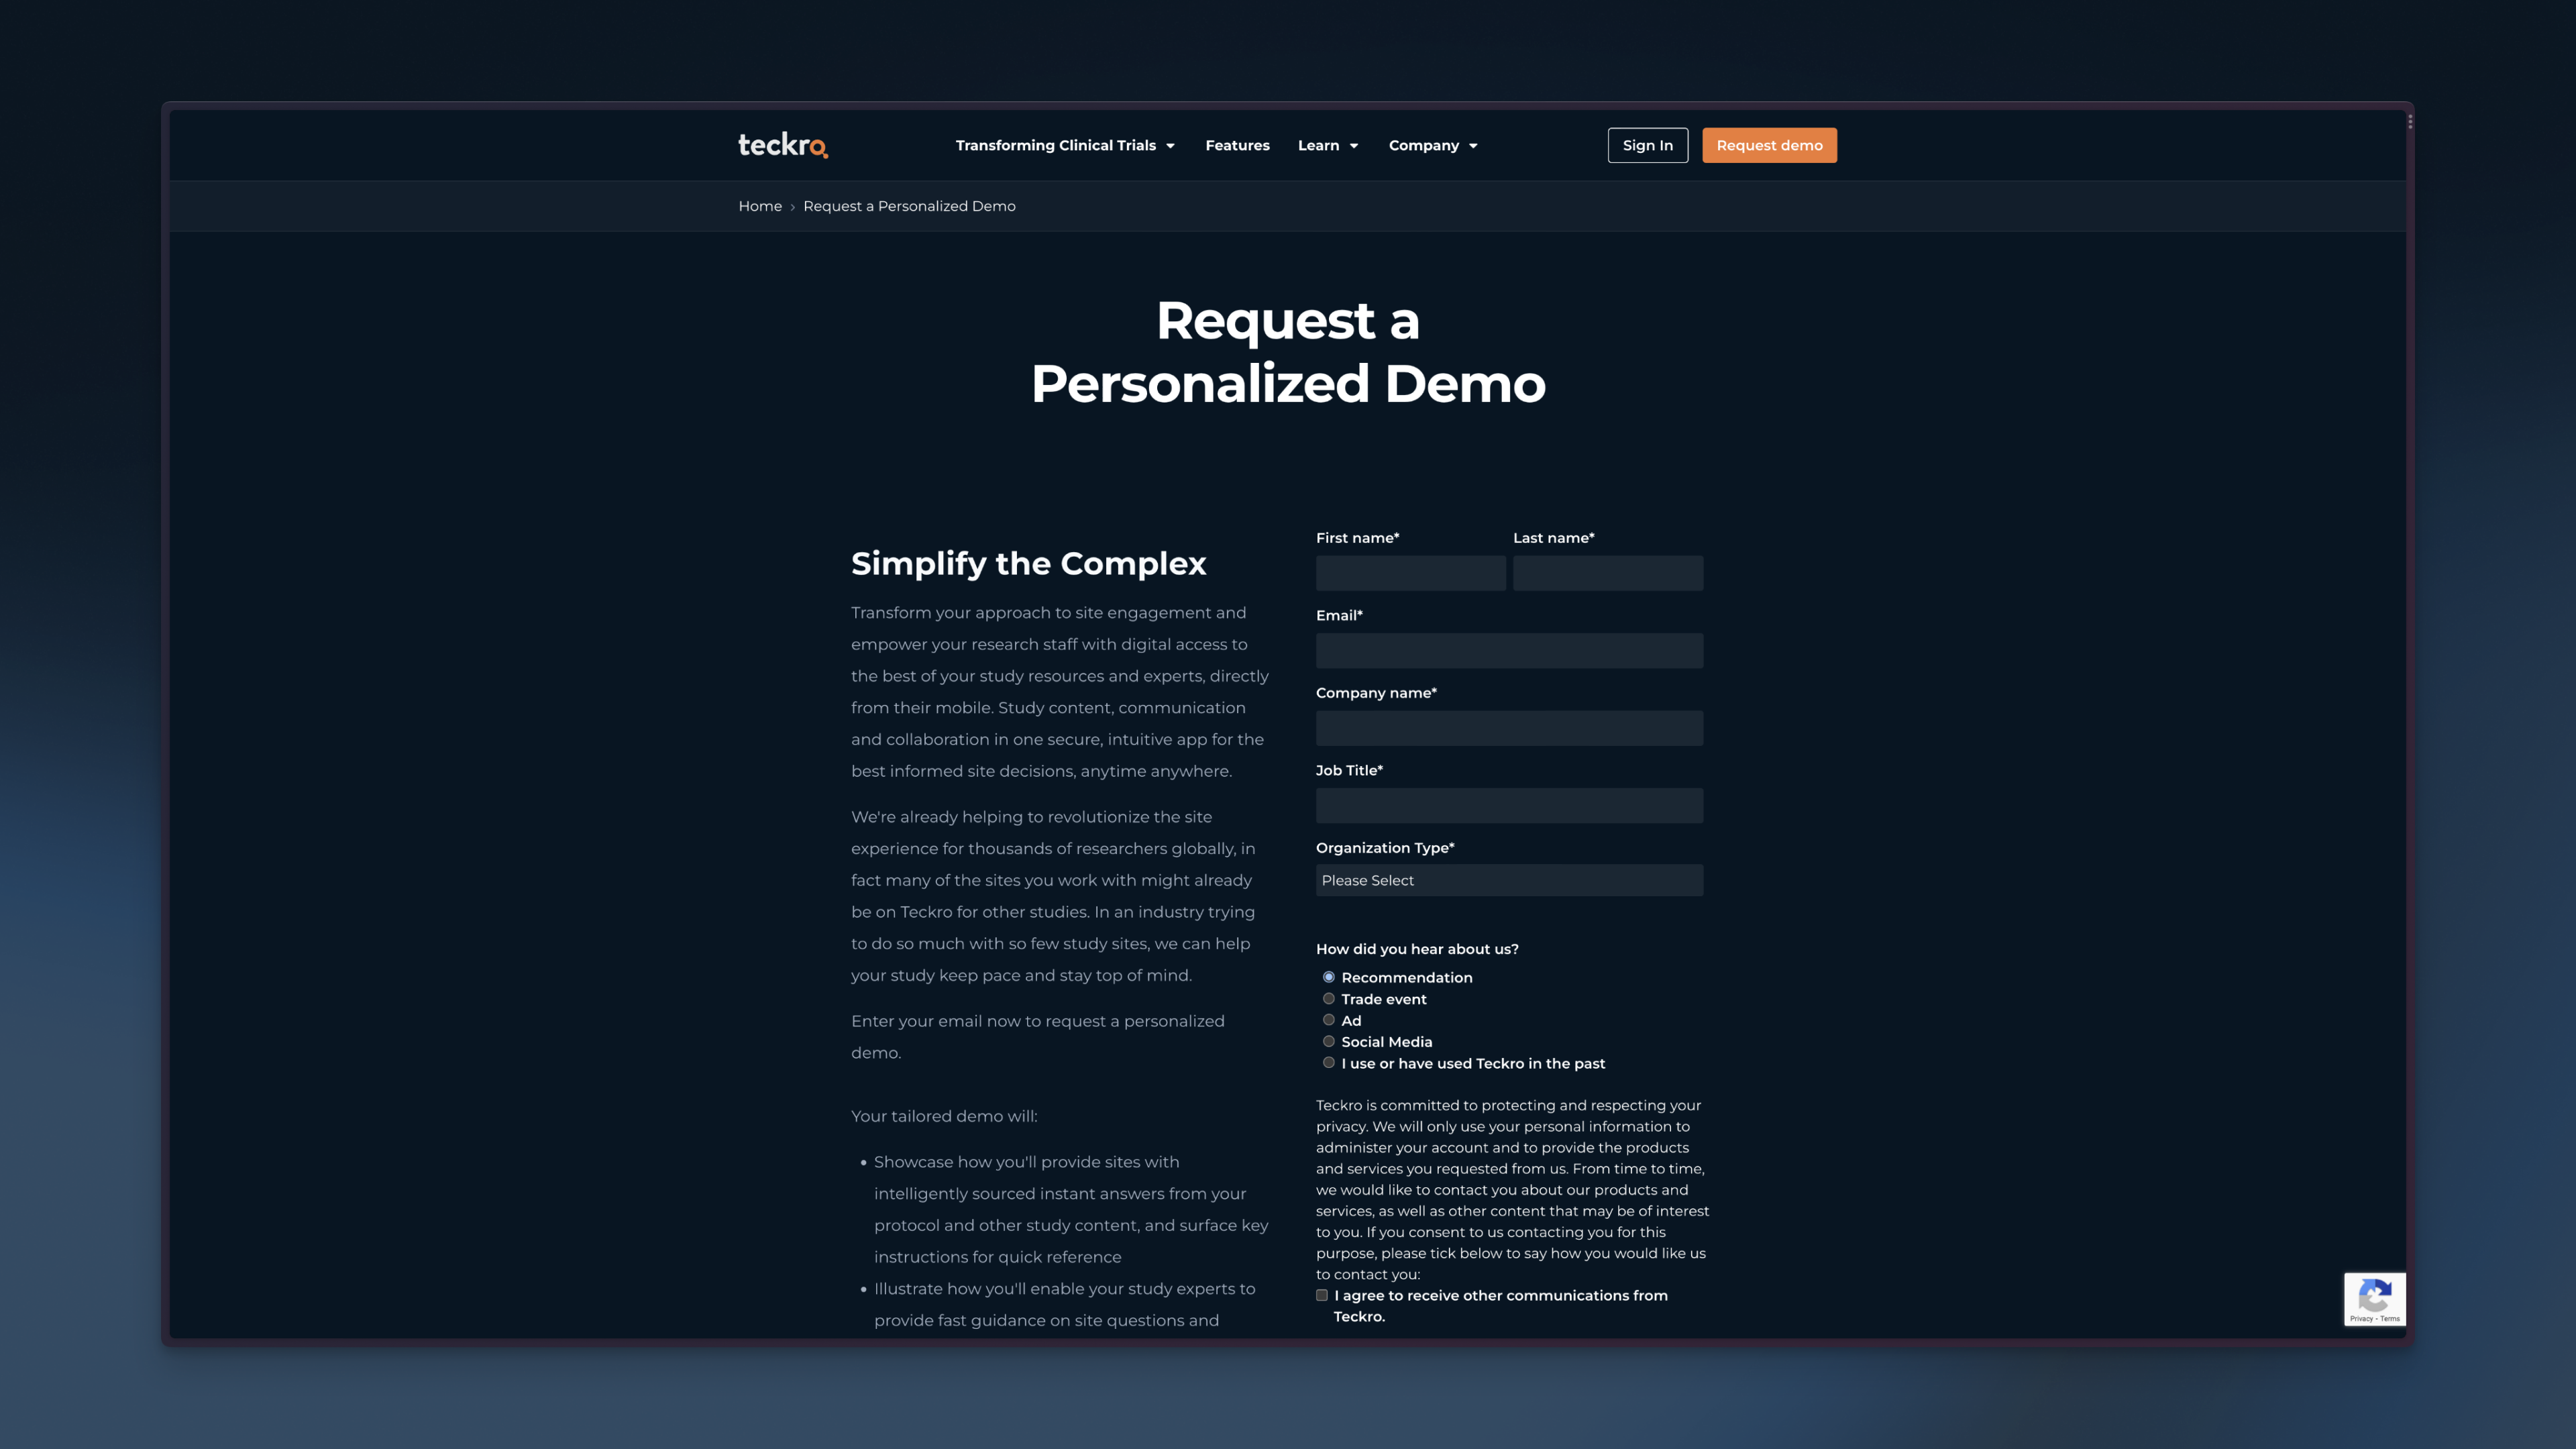 Teckro hubspot form being used to populate request demo page